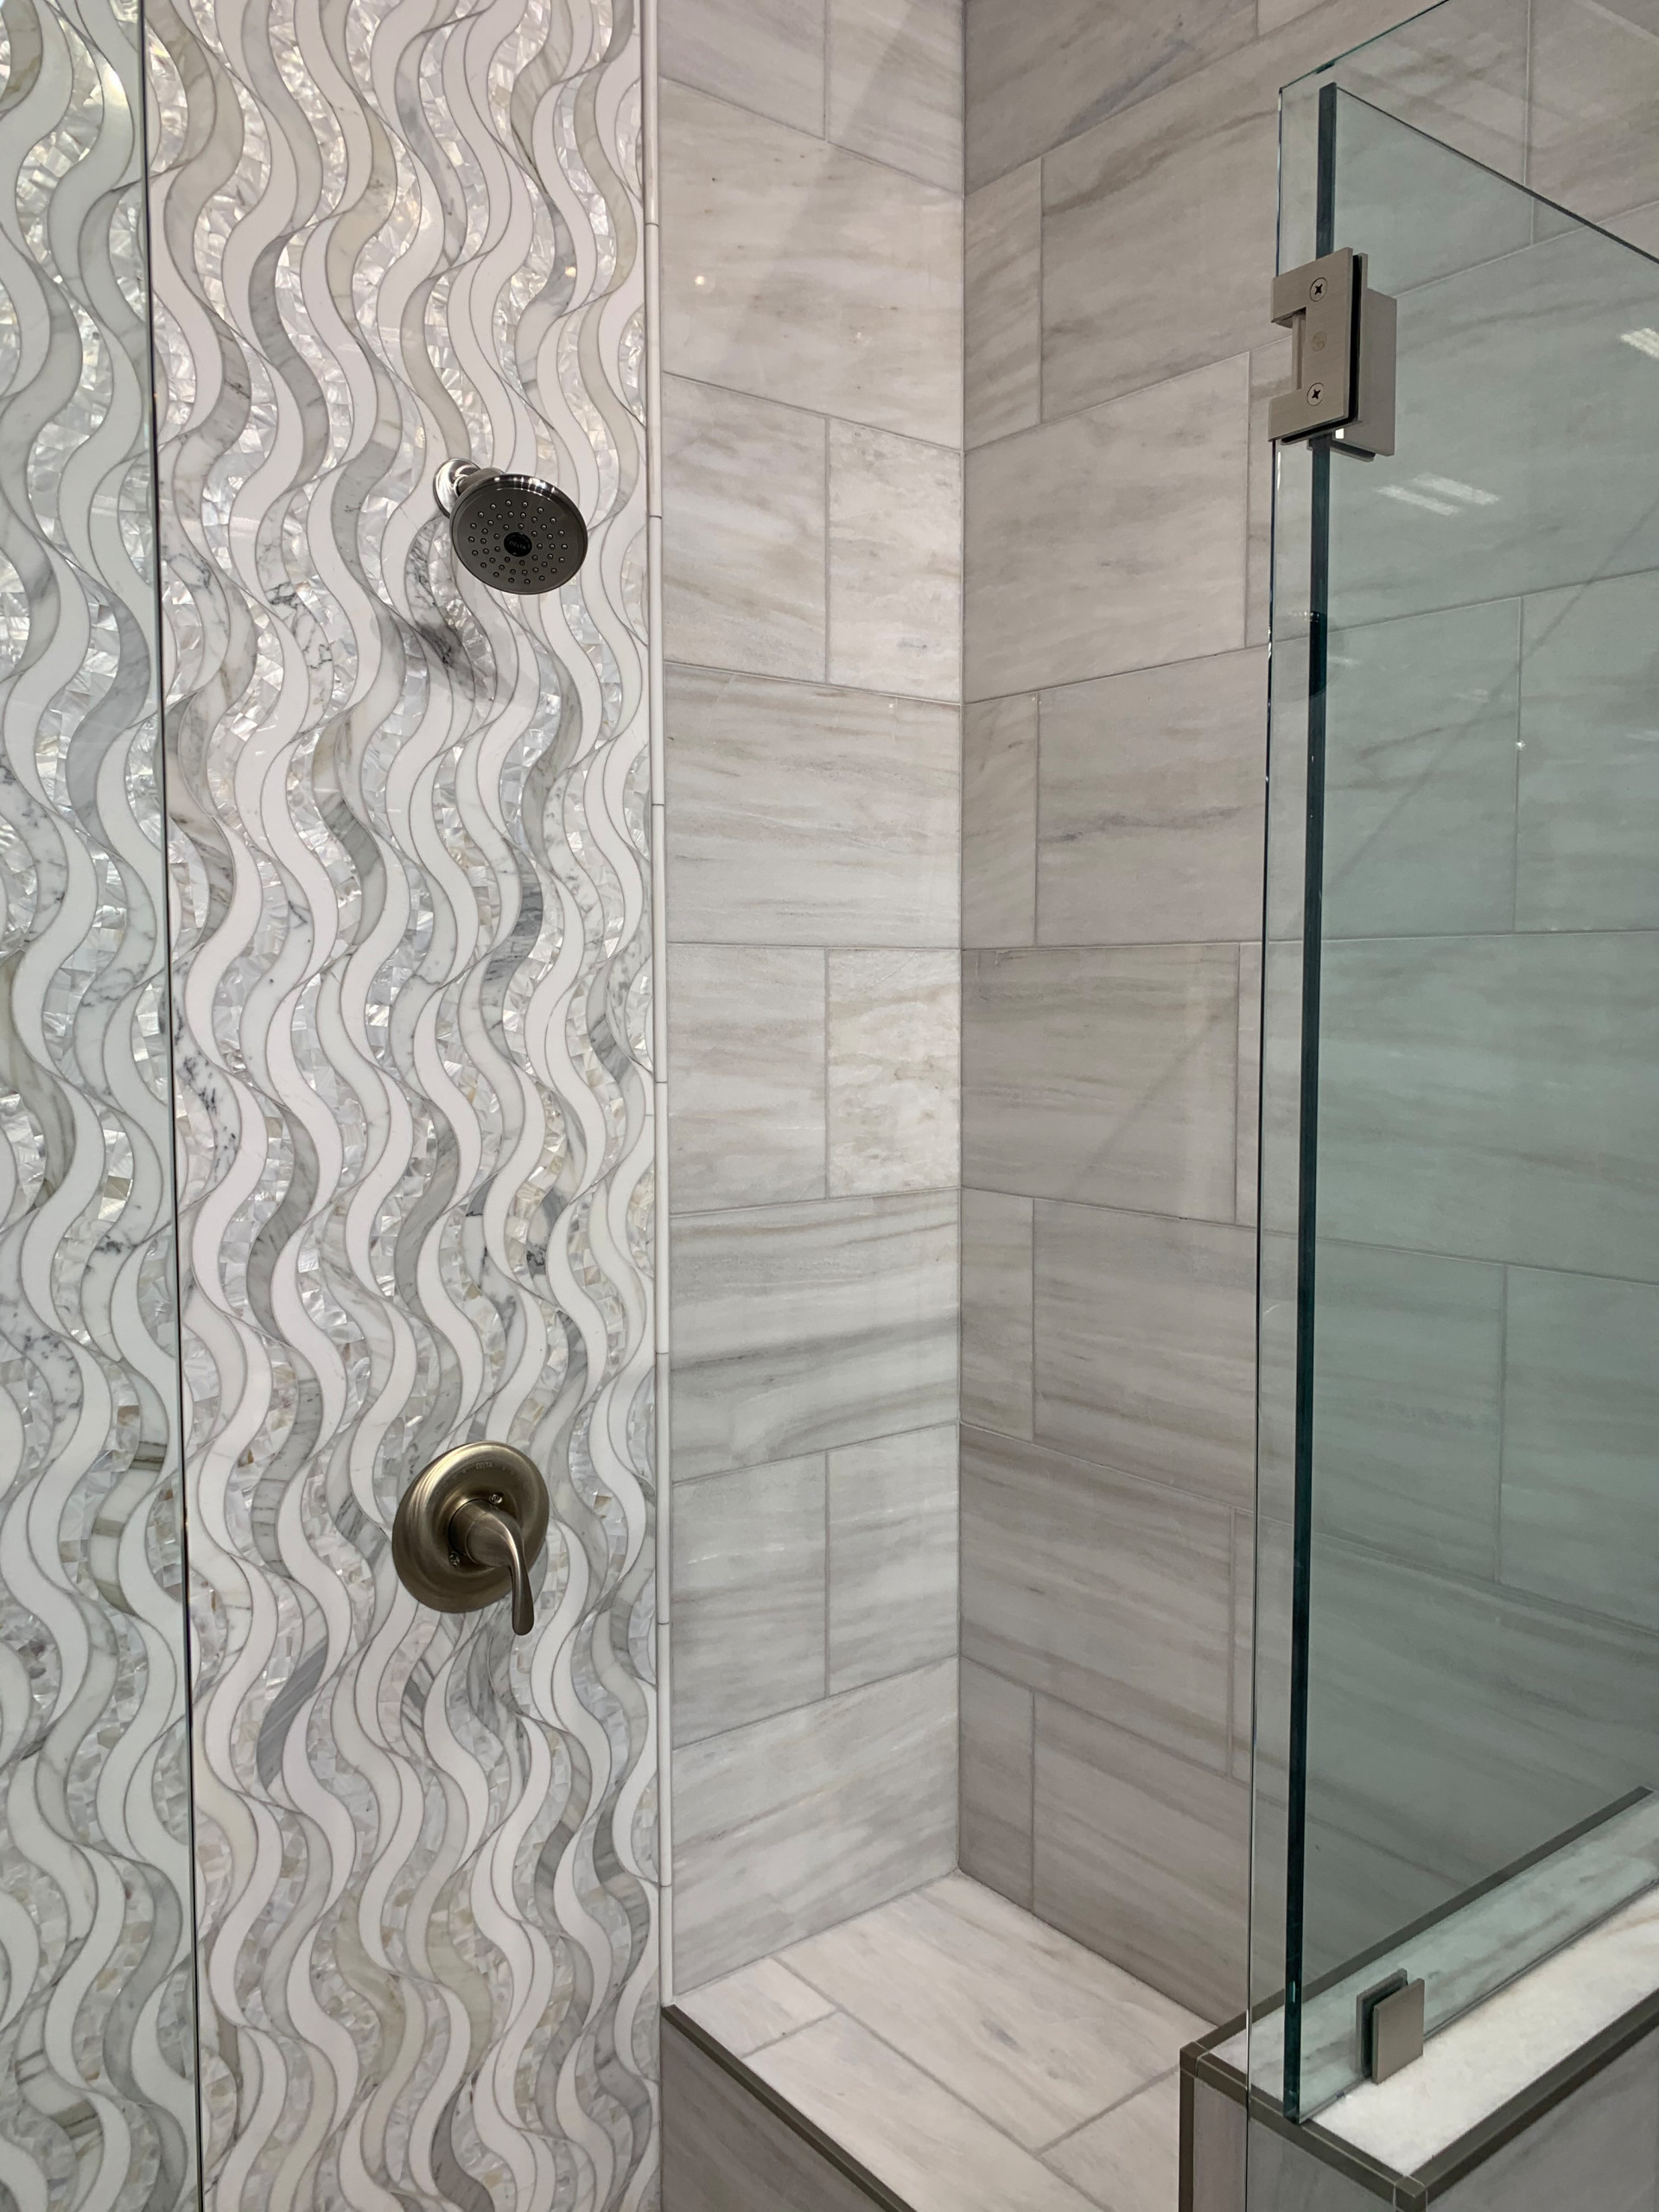 STUNNING WATERY MOTHER OF PEARL MOSAIC TILE FEATURE